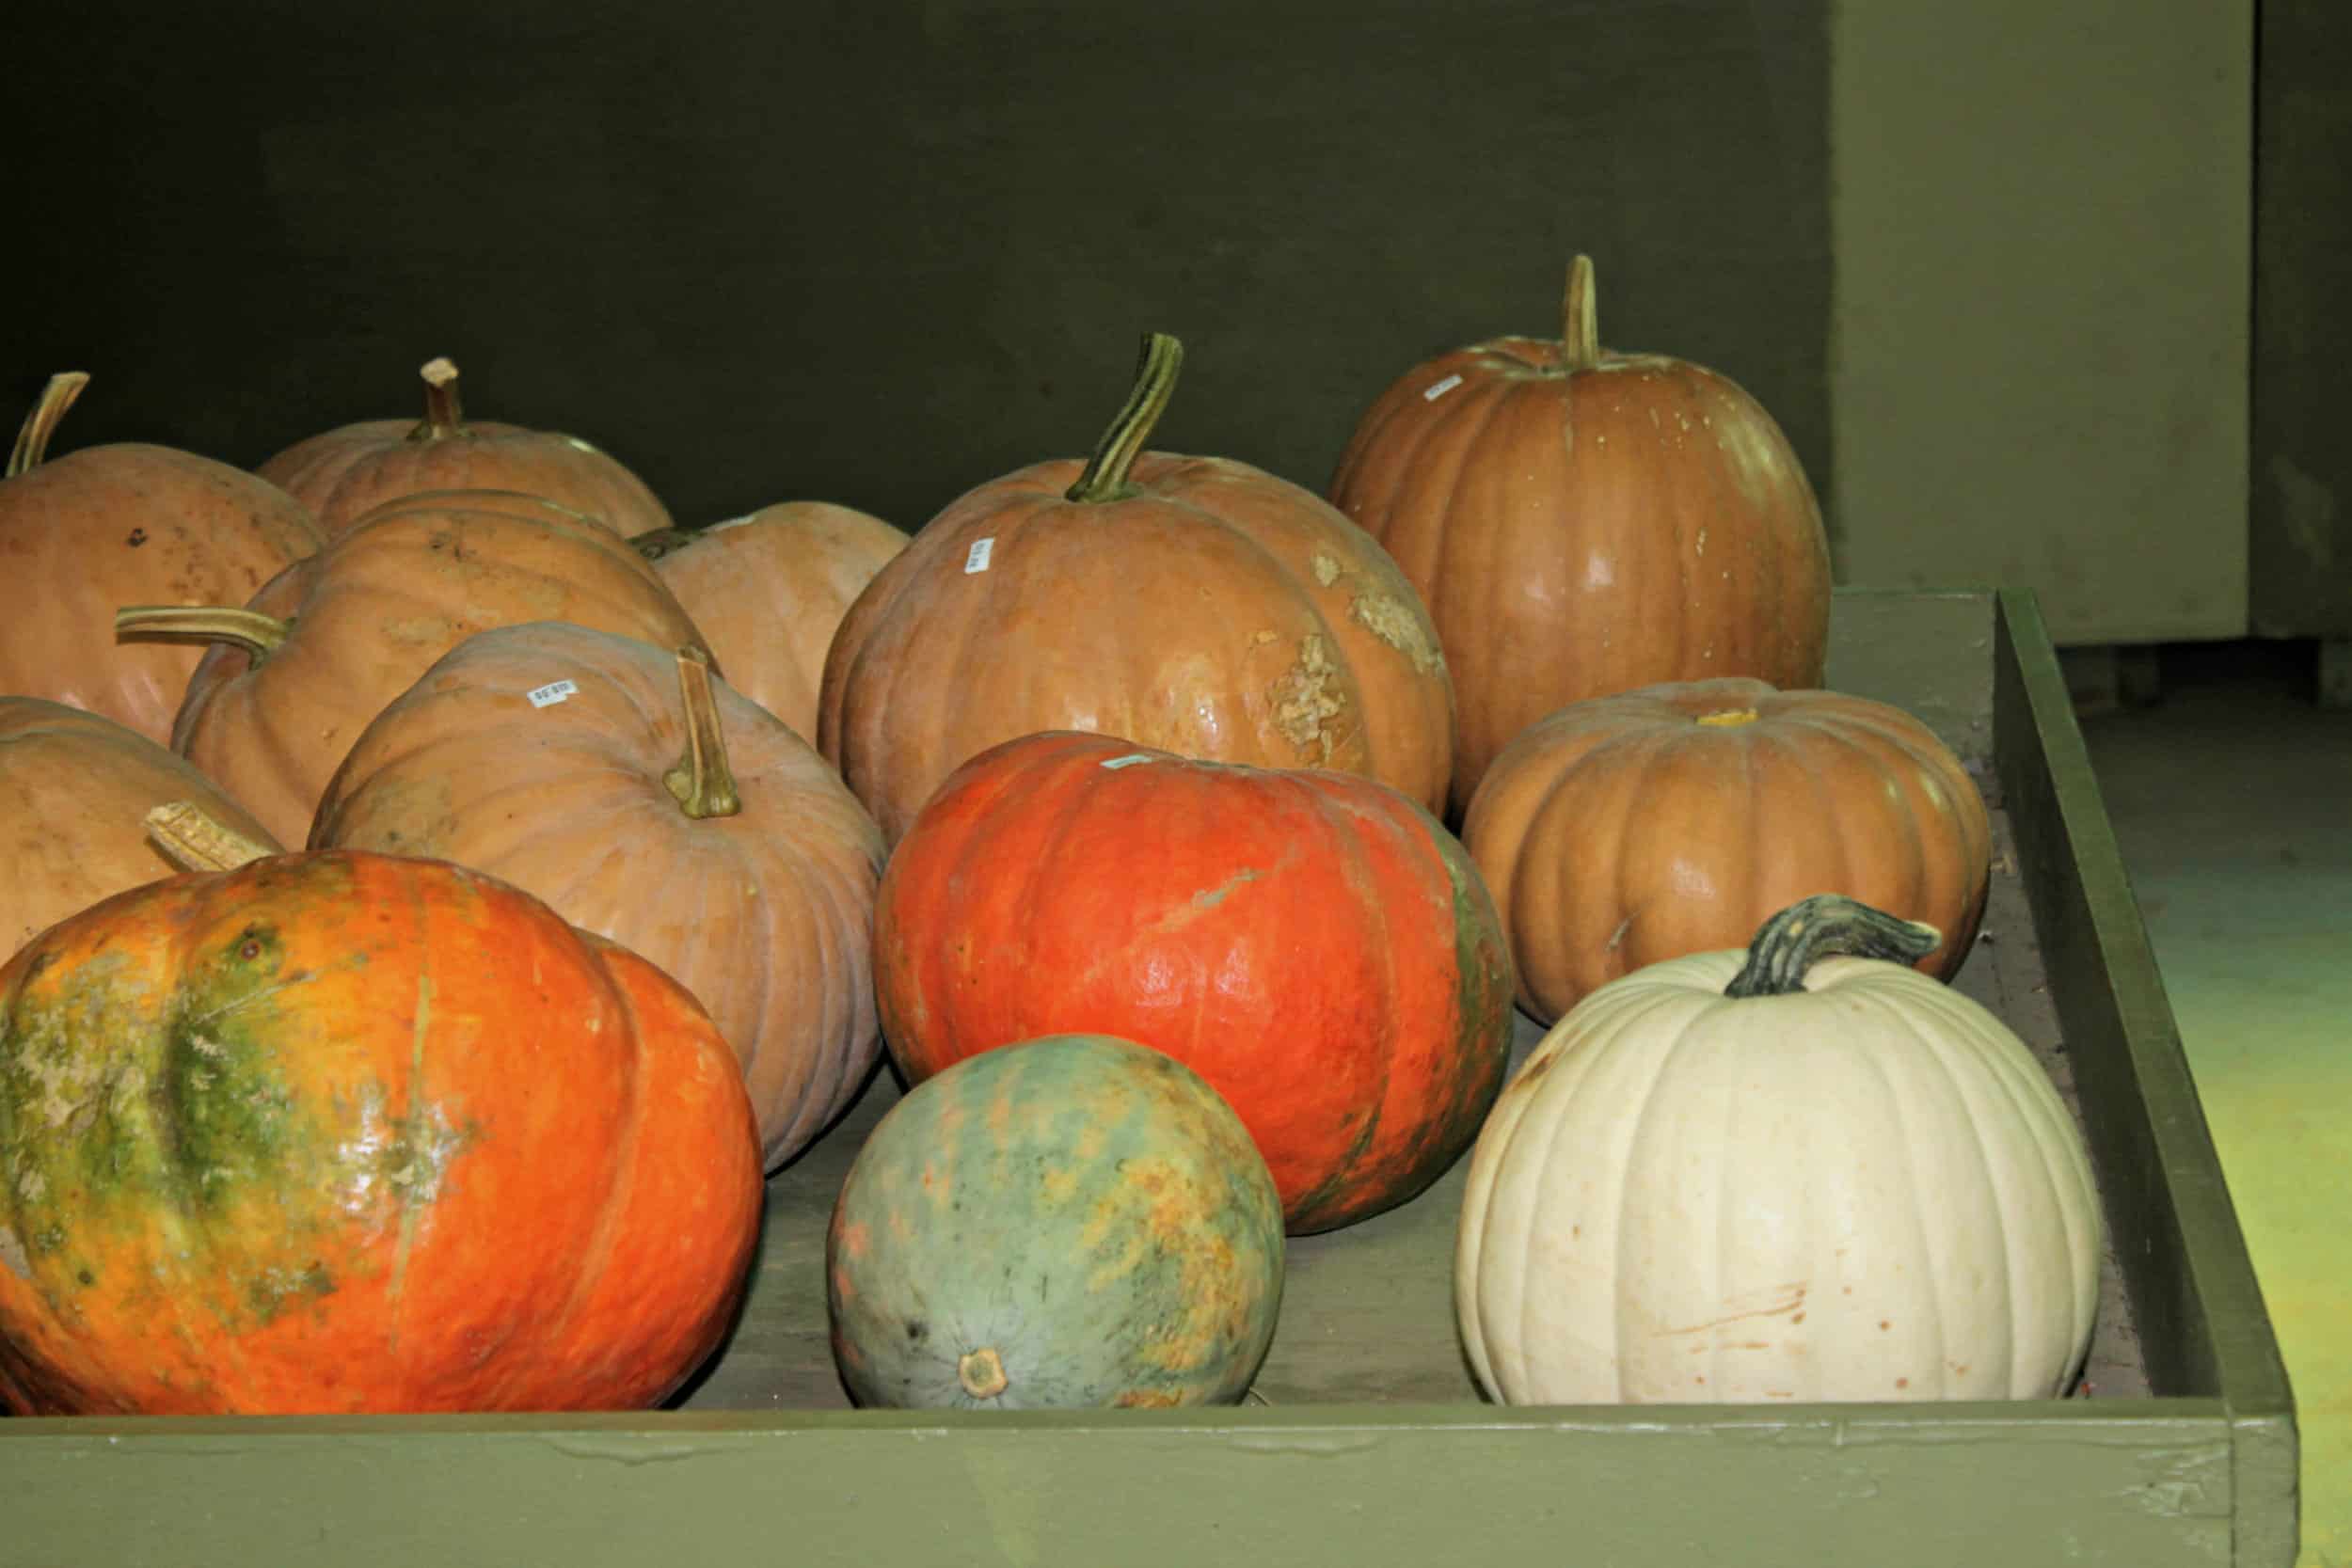 Along with pre-picked apples, pumpkins, gourds and other fall decorative vegetables are sold in the Sky Top market for great prices and multiple options for anyone to enjoy.